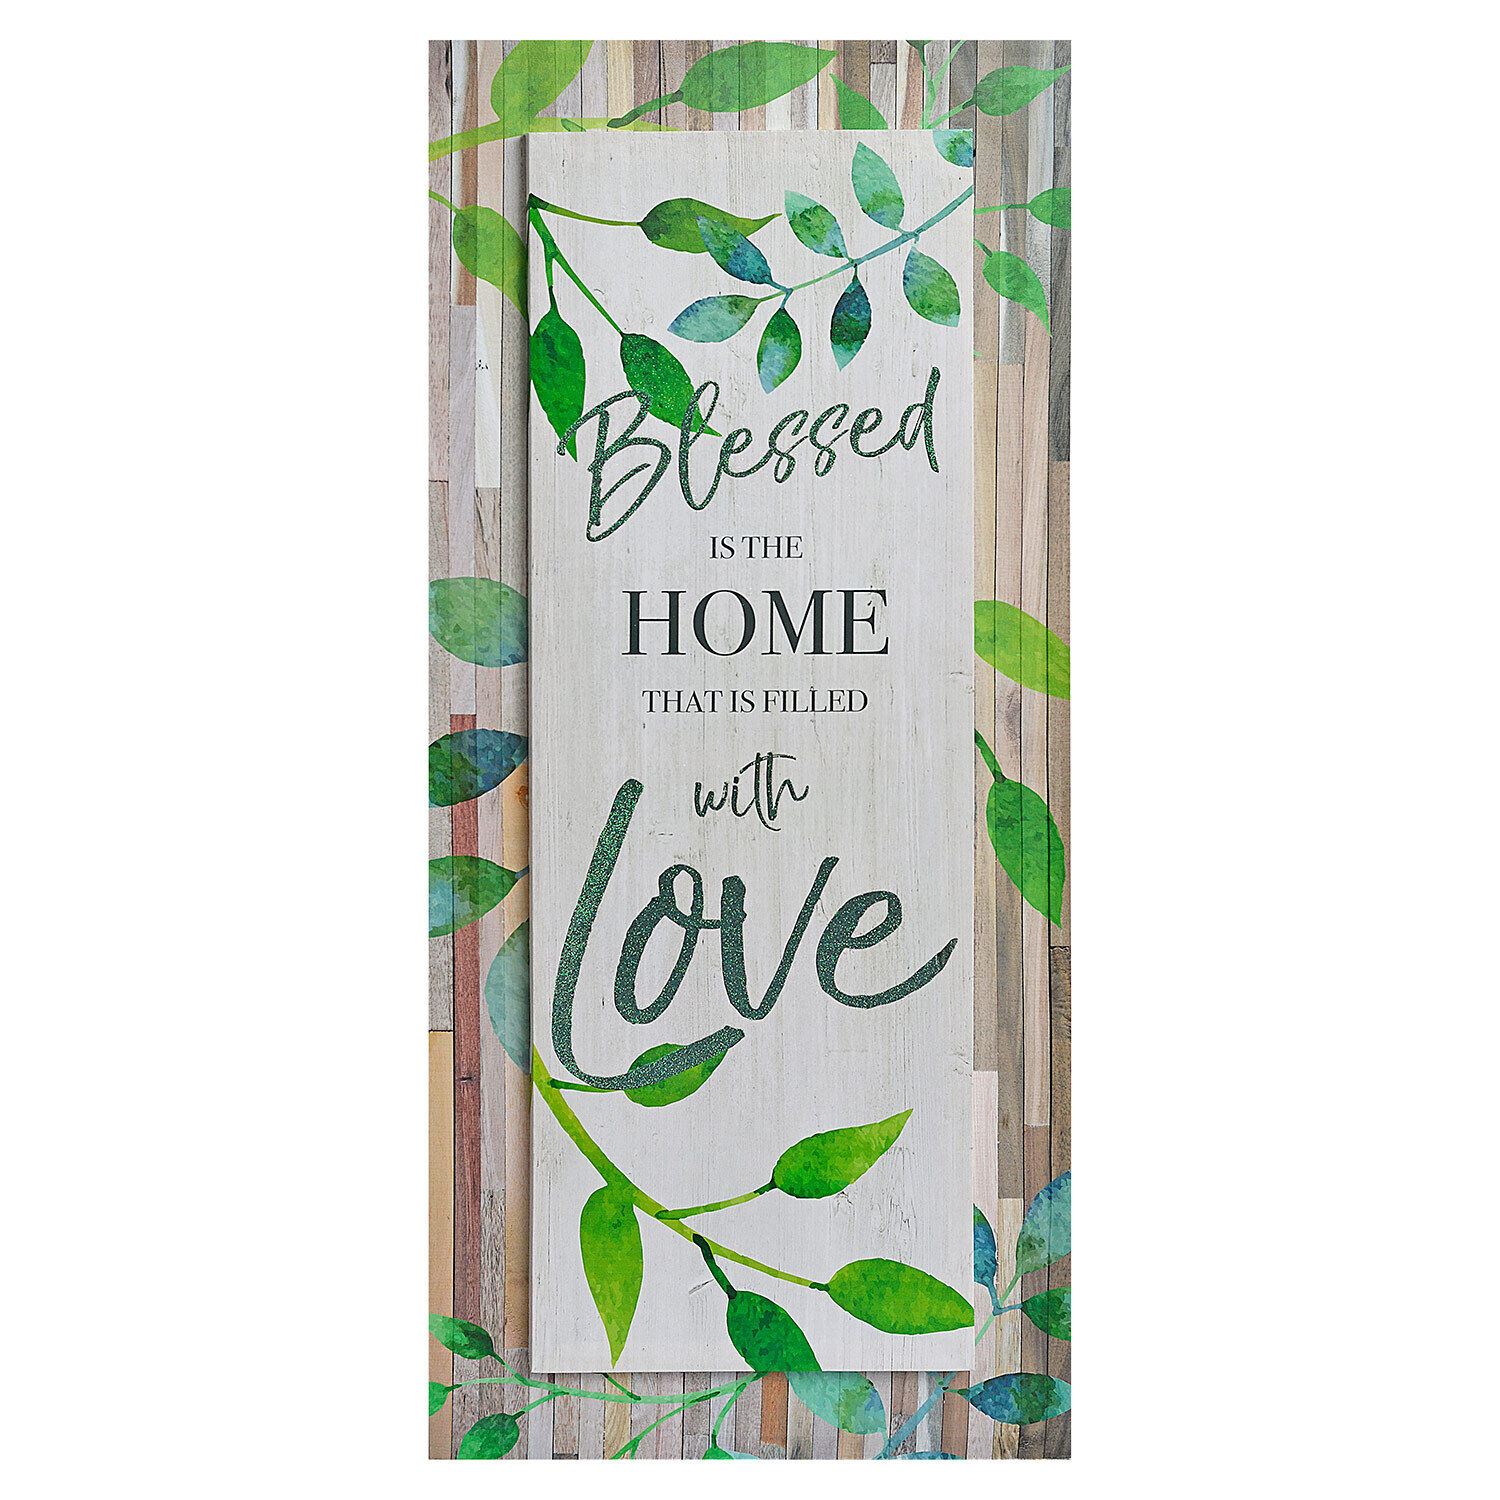 Premius Blessed Is The Home That Is Filled With Love Wall Art, 18x42 Inches